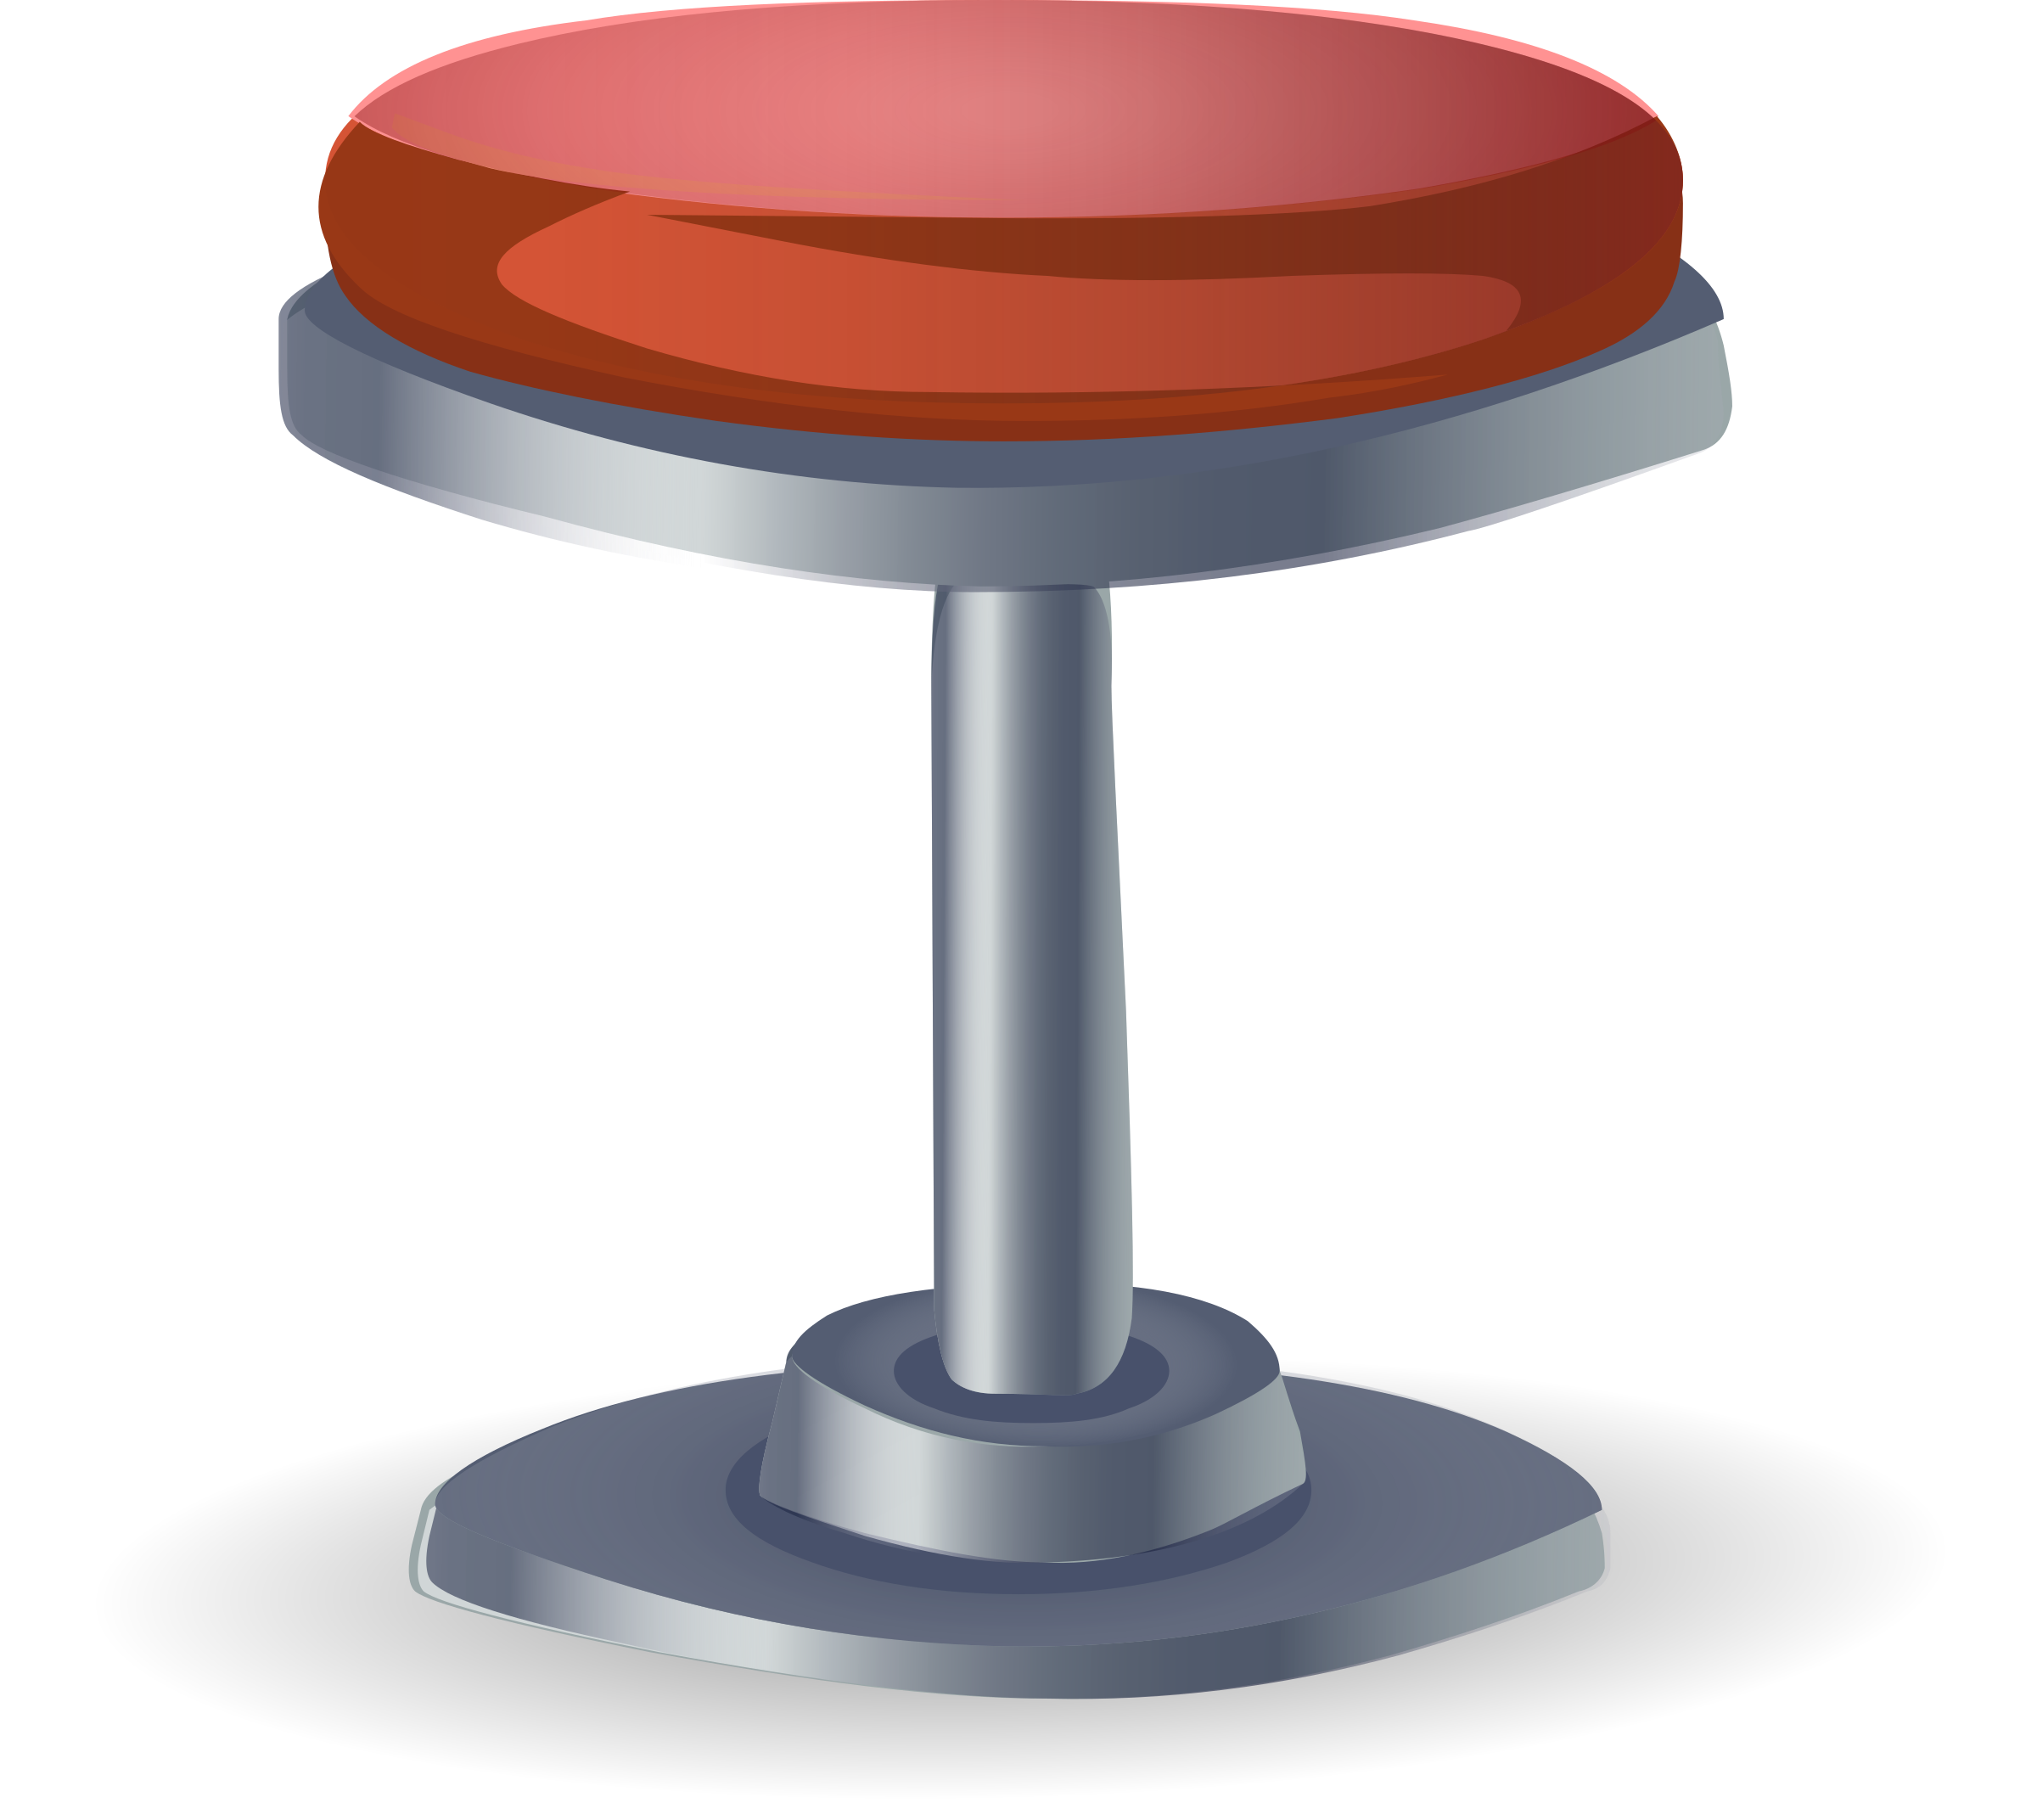 red-stool-vector-clipart.png